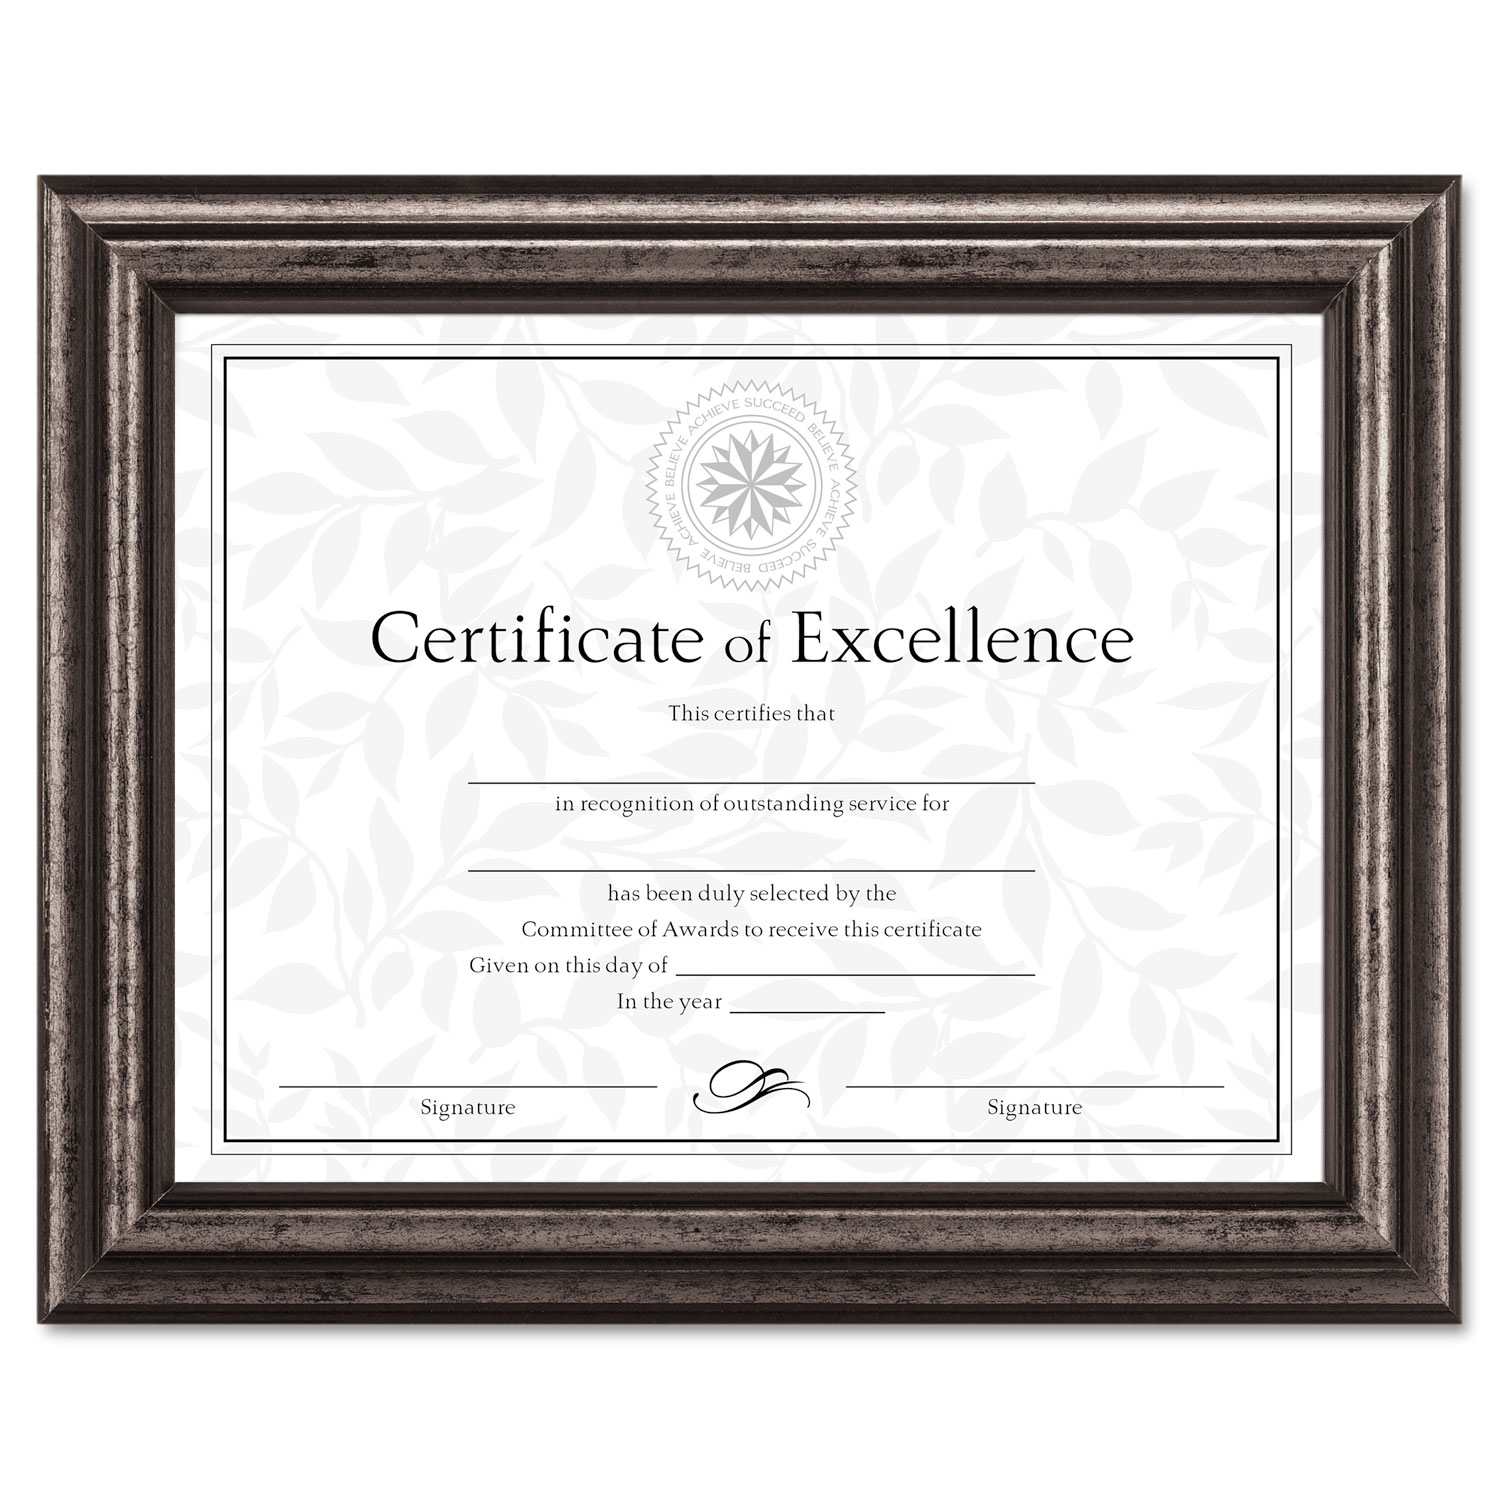  DAX N15790NT Document Frame, Desk/Wall, Wood, 8-1/2 x 11, Antique Charcoal Brushed Finish (DAXN15790NT) 